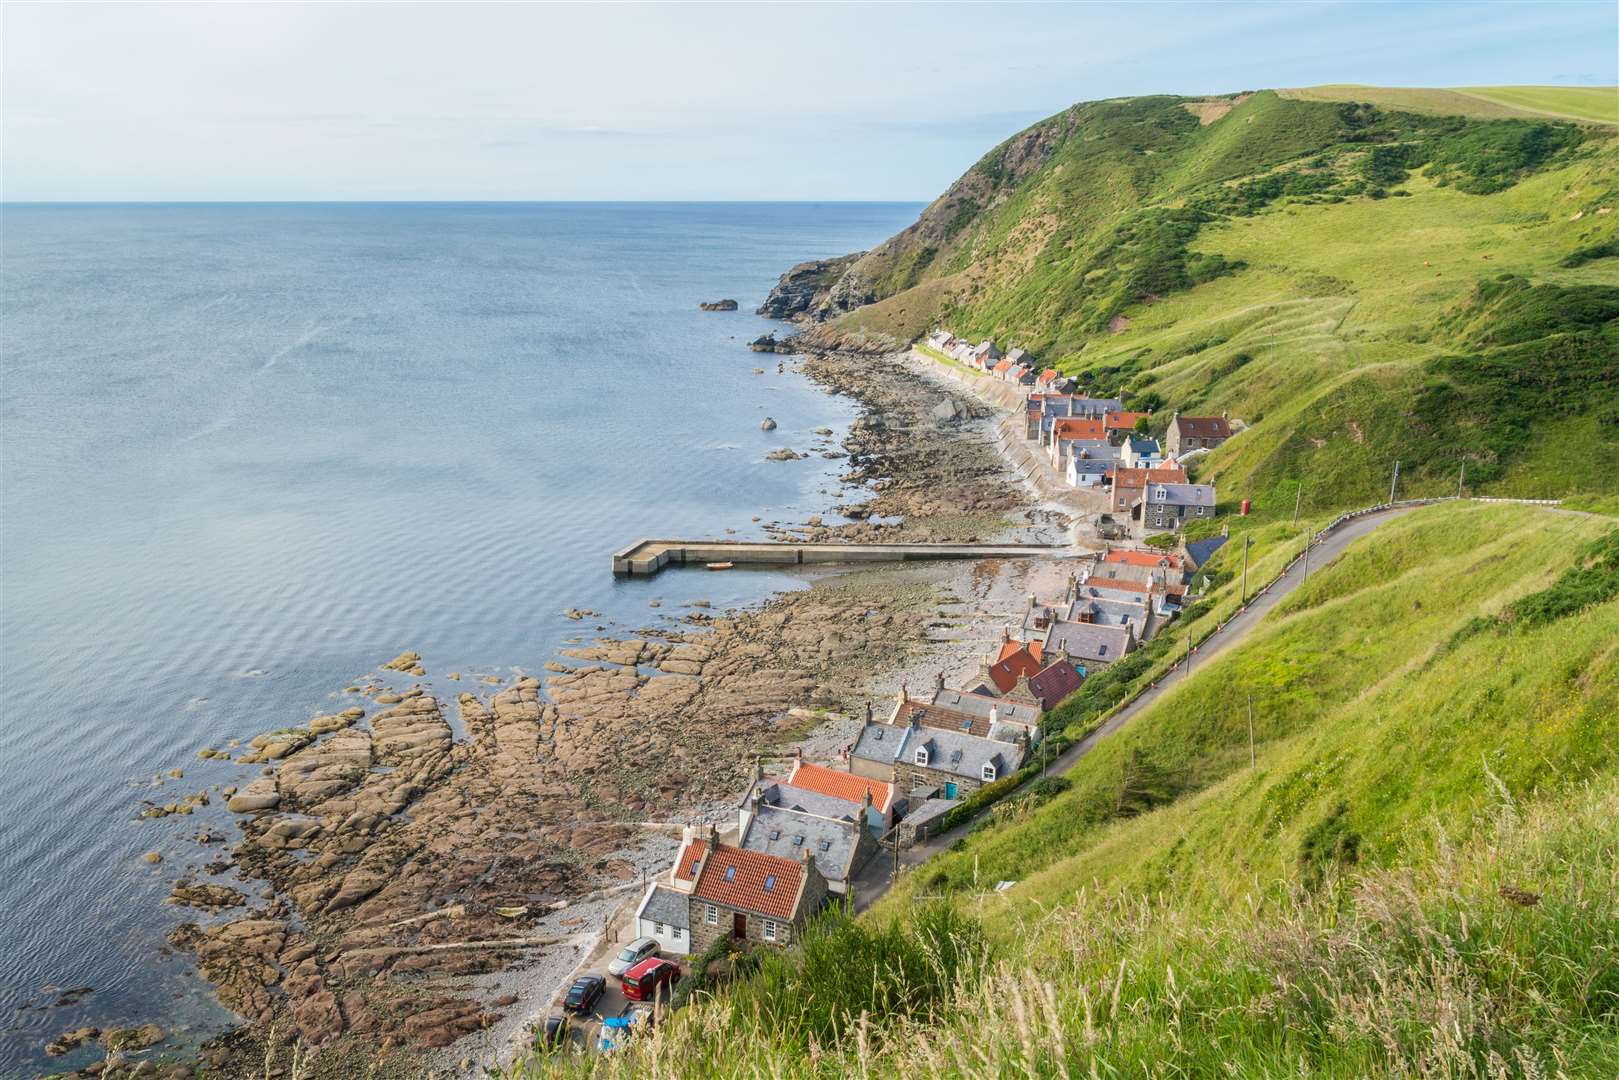 Holiday home owners in locations such as Crovie could see costs rise markedly.